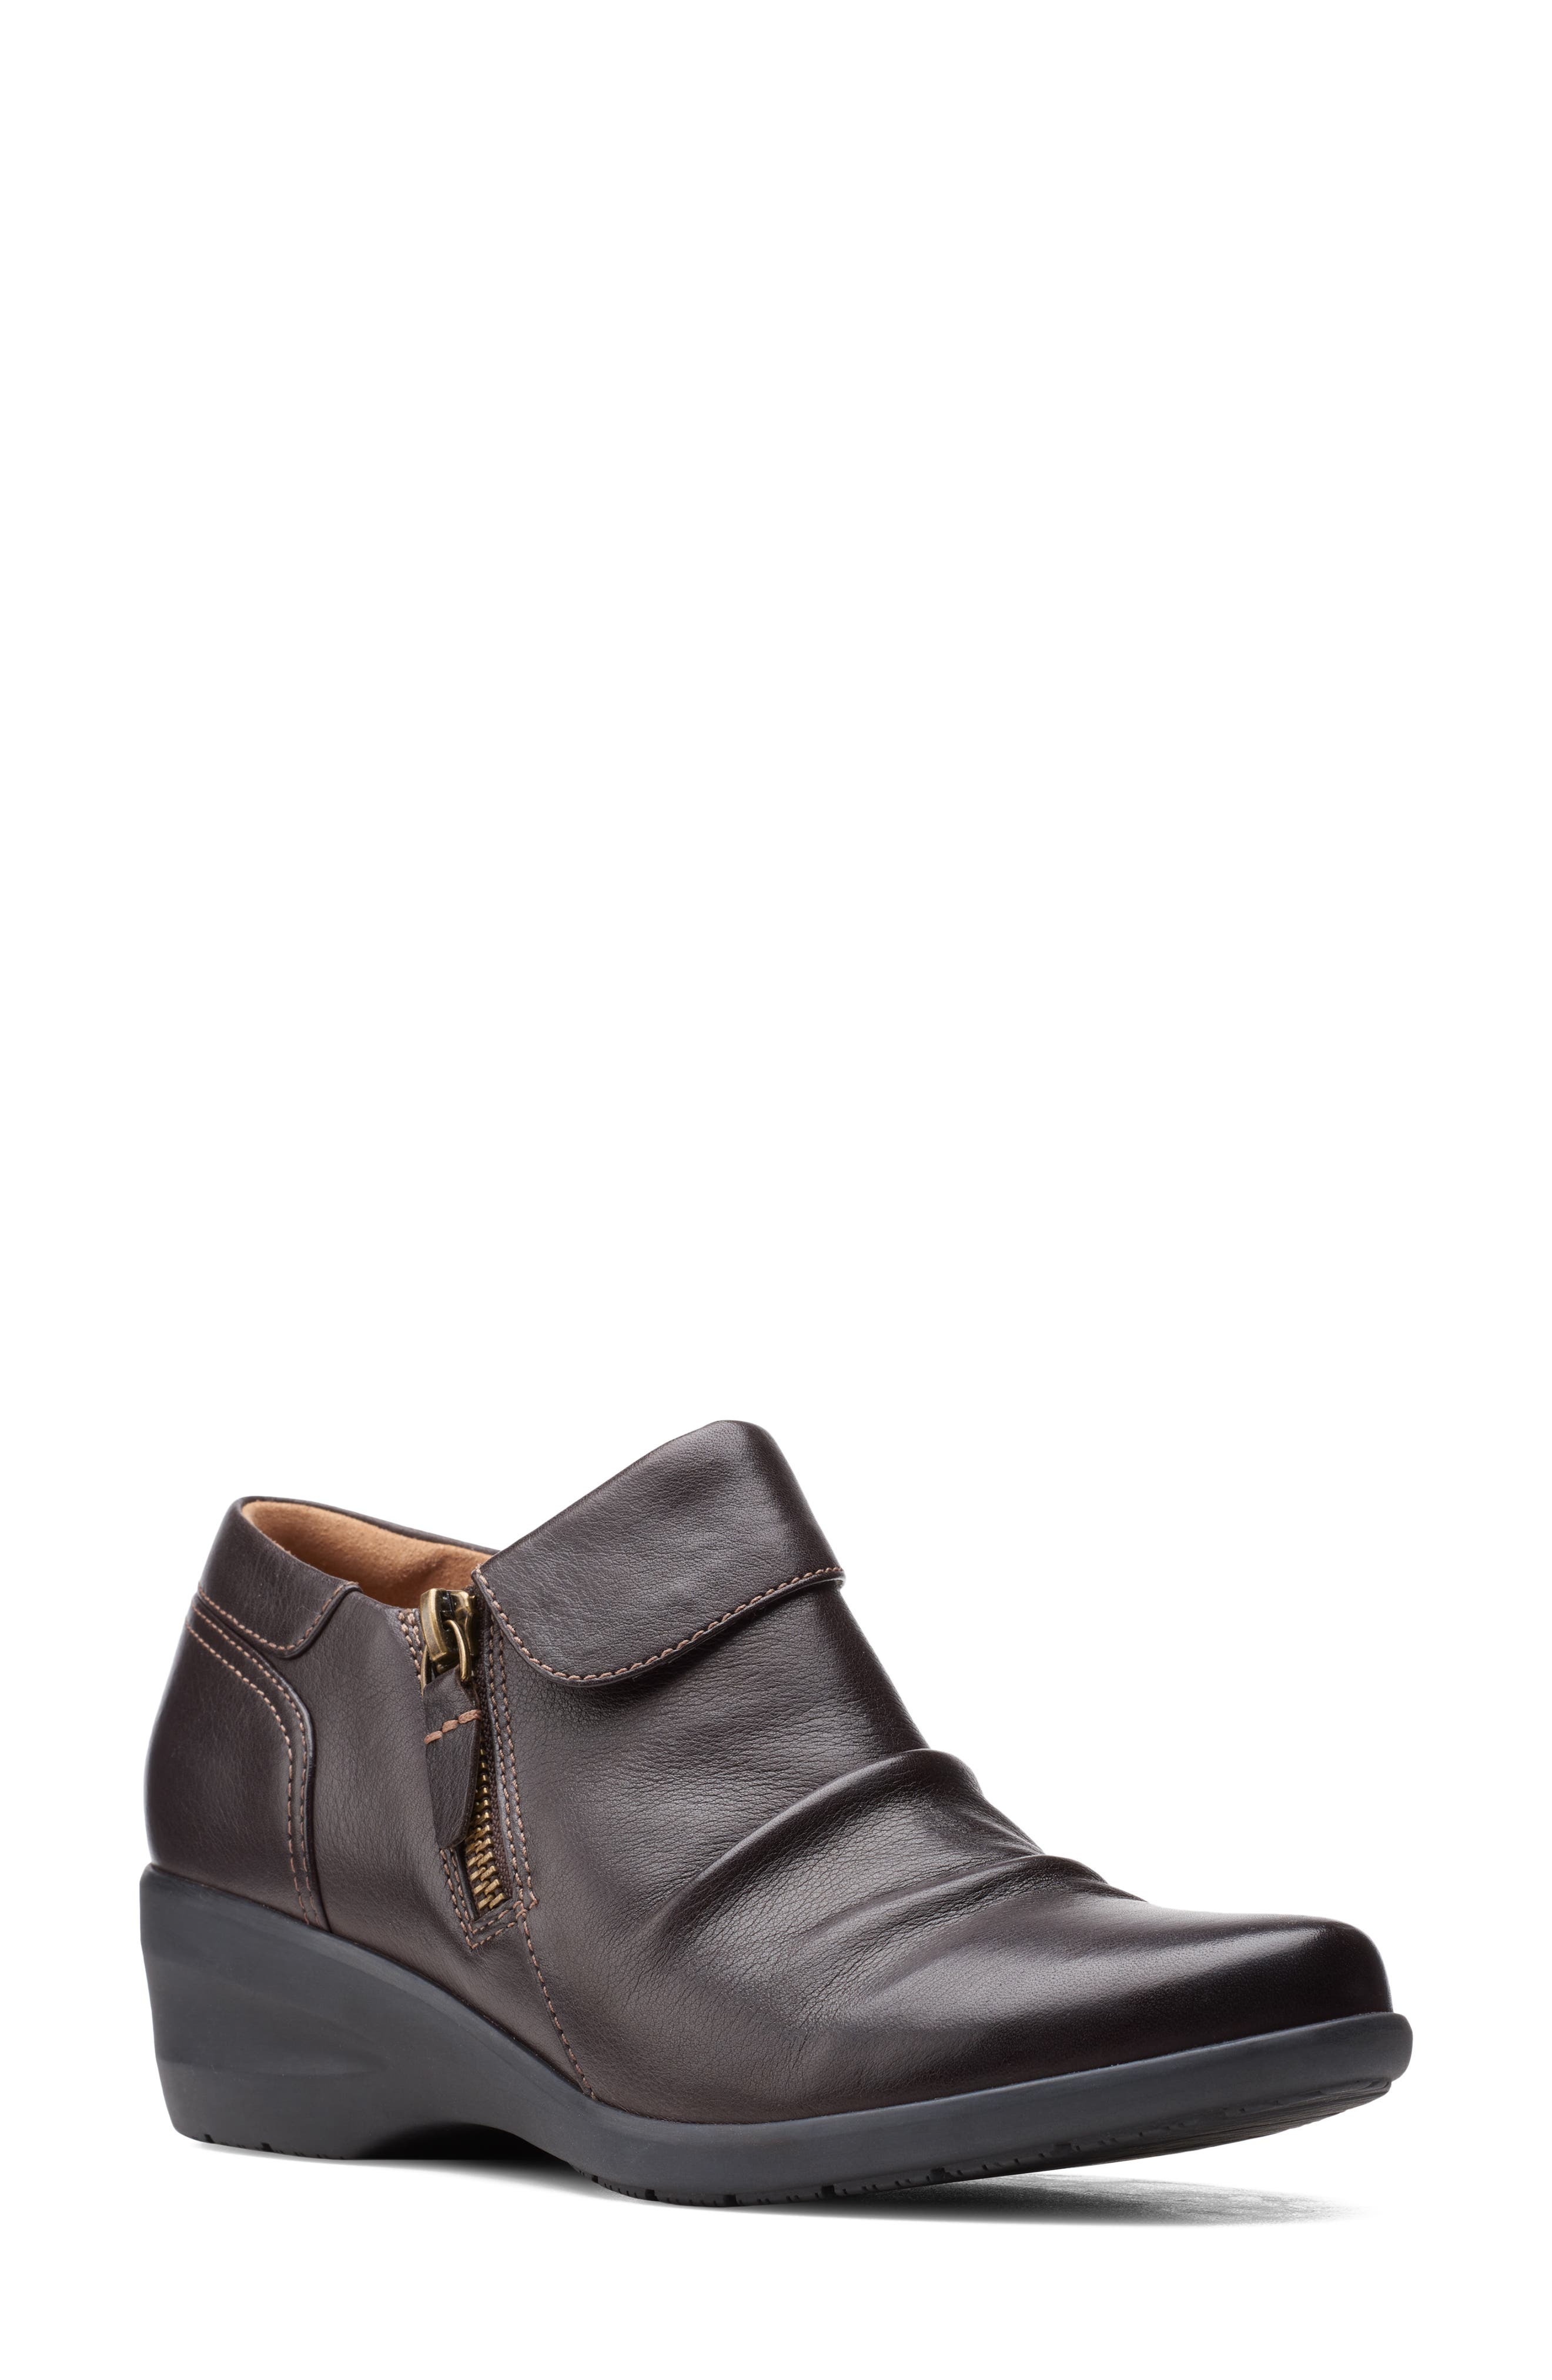 clarks black leather booties